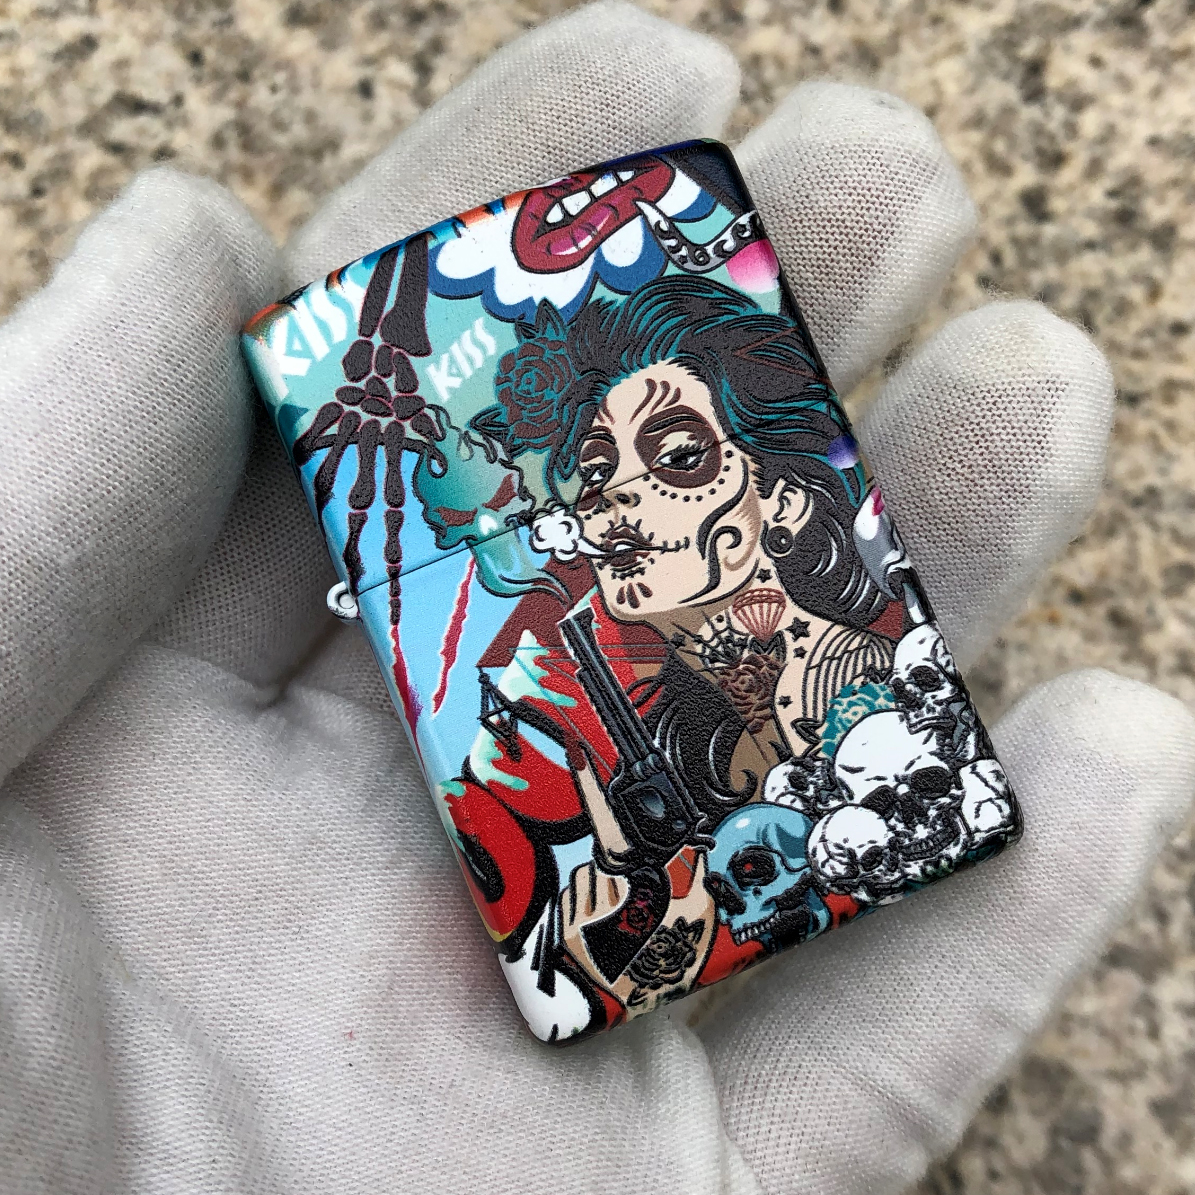 Zippo Windproof 540 Color Day of the Dead Design Lighter